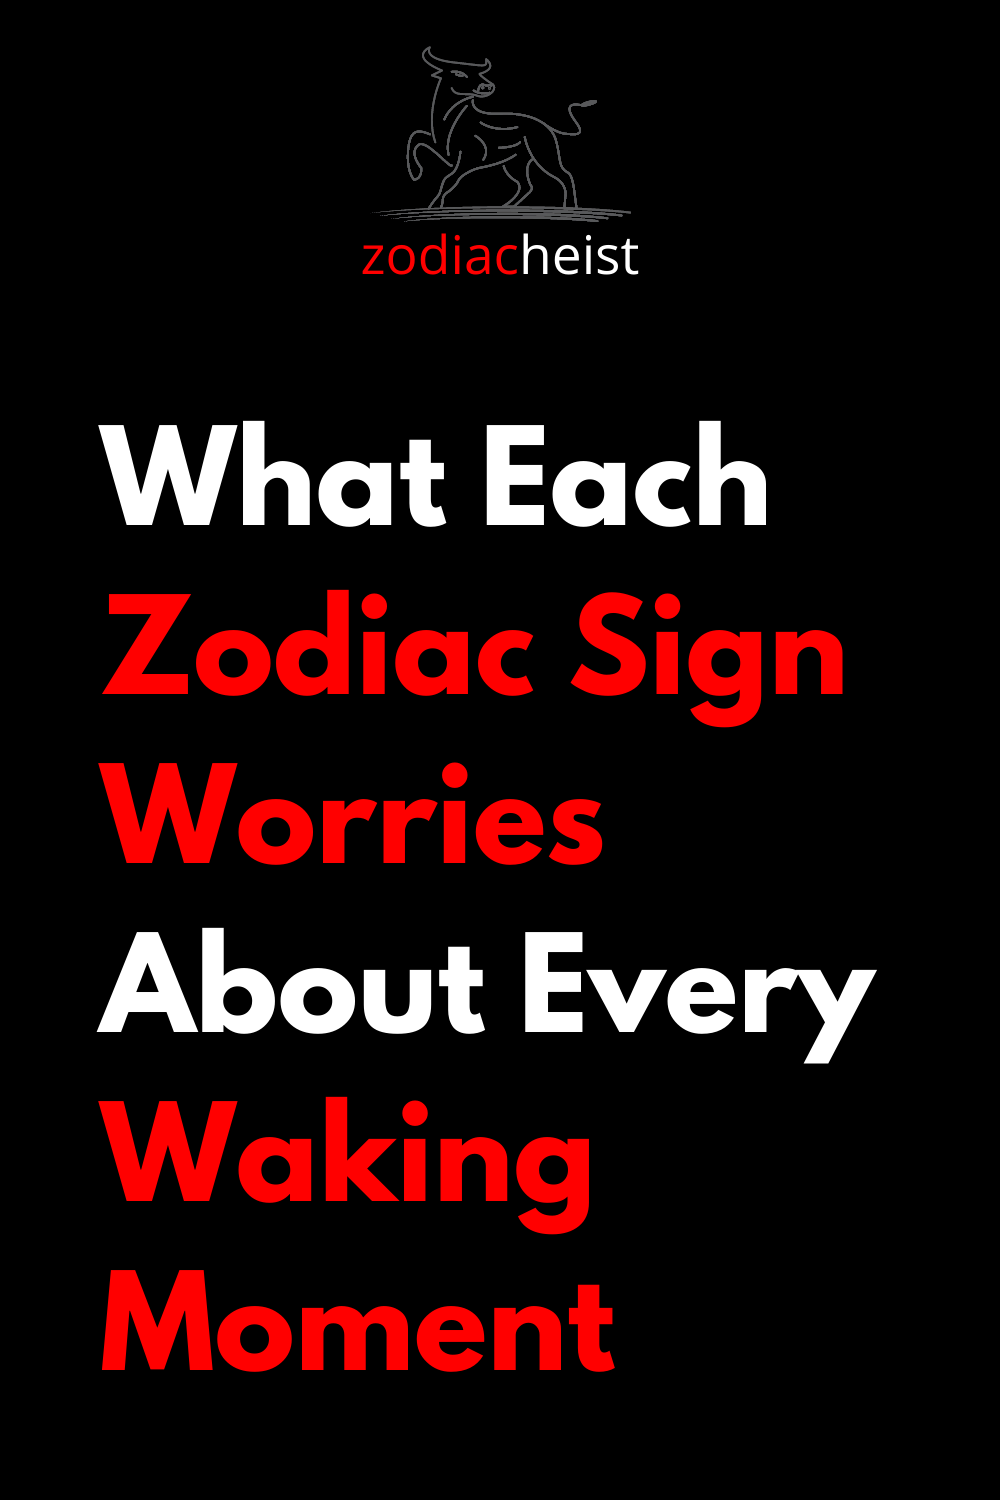 What Each Zodiac Sign Worries About Every Waking Moment